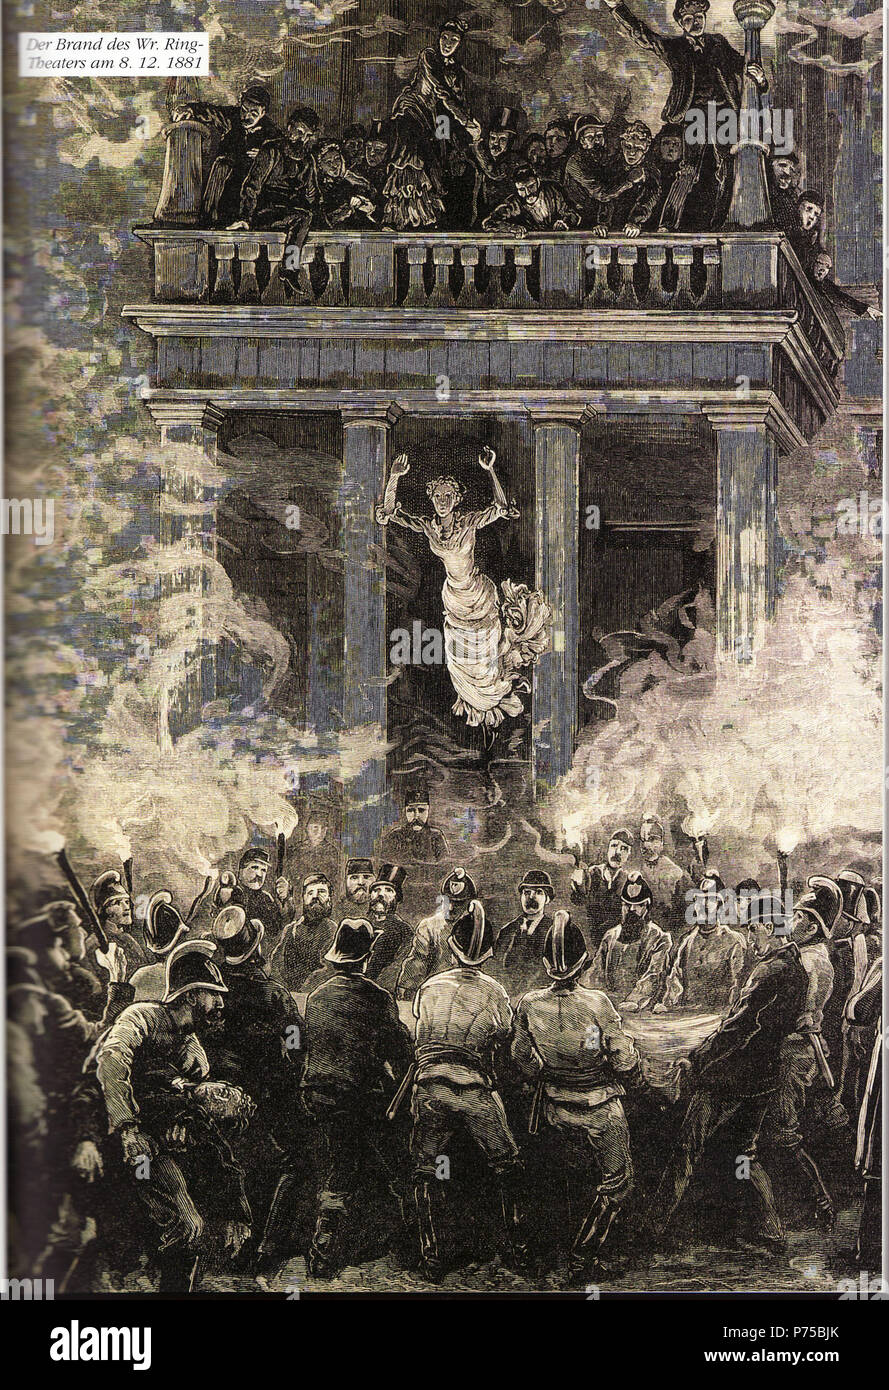 Ringtheater fire in Vienna, December 8, 1881 . N/A 22 Carl  Pippich-Ringtheater Stock Photo - Alamy